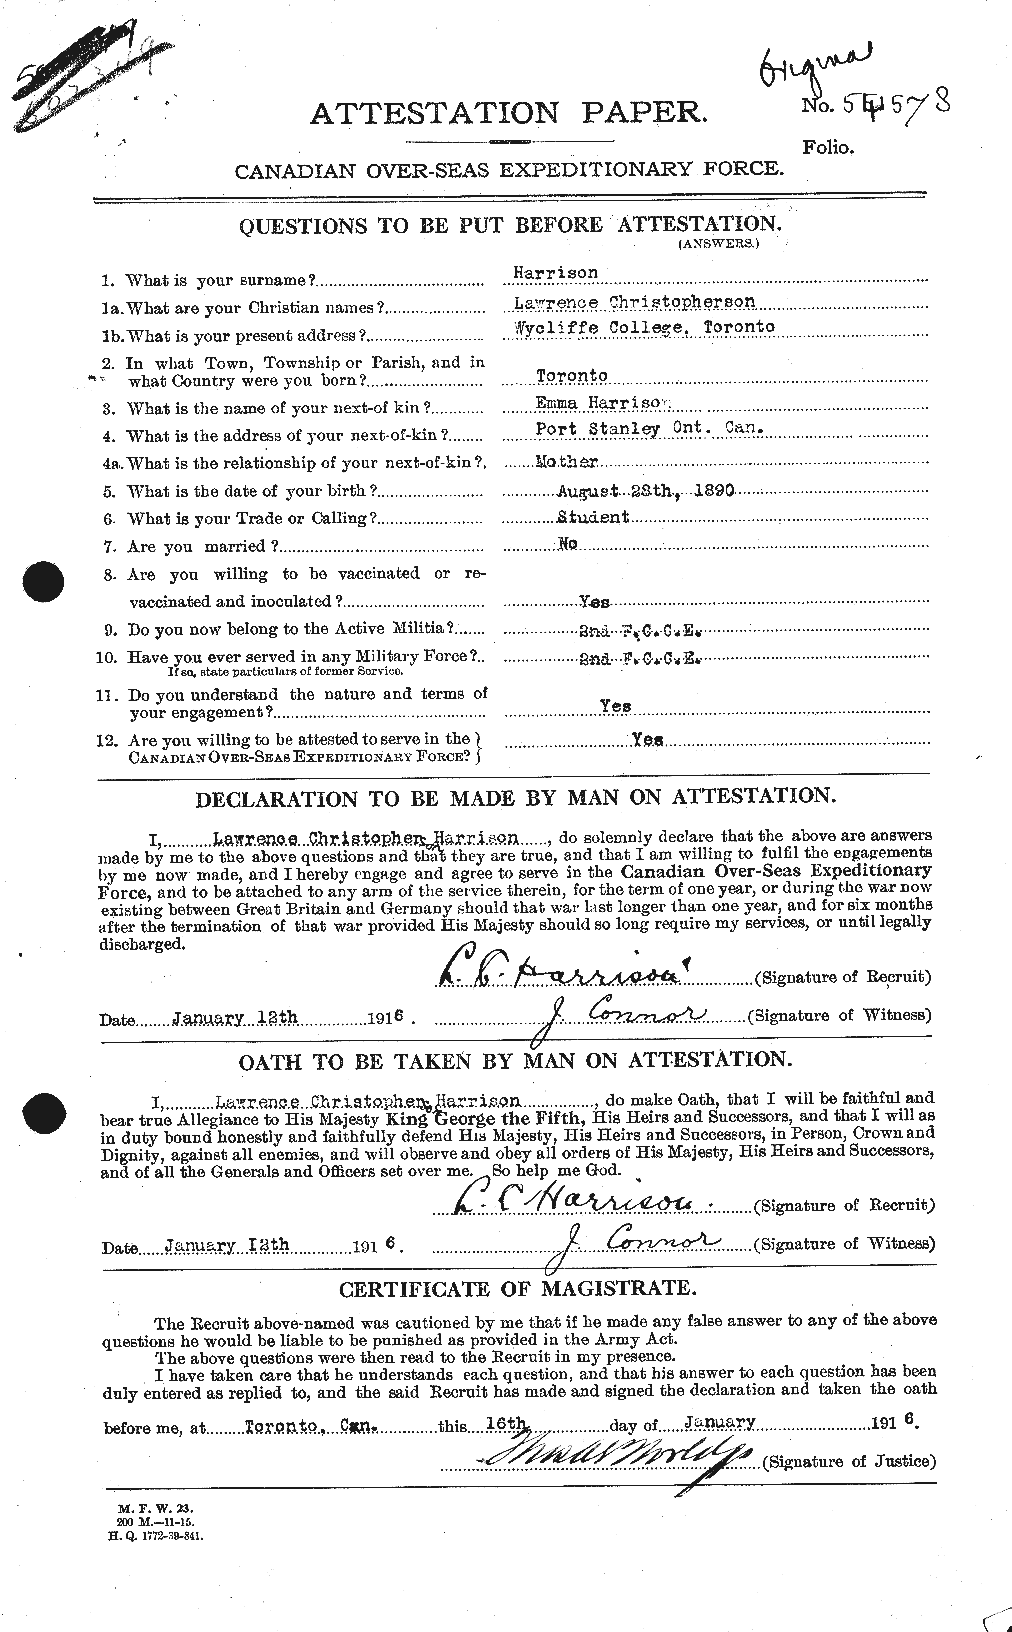 Personnel Records of the First World War - CEF 377559a